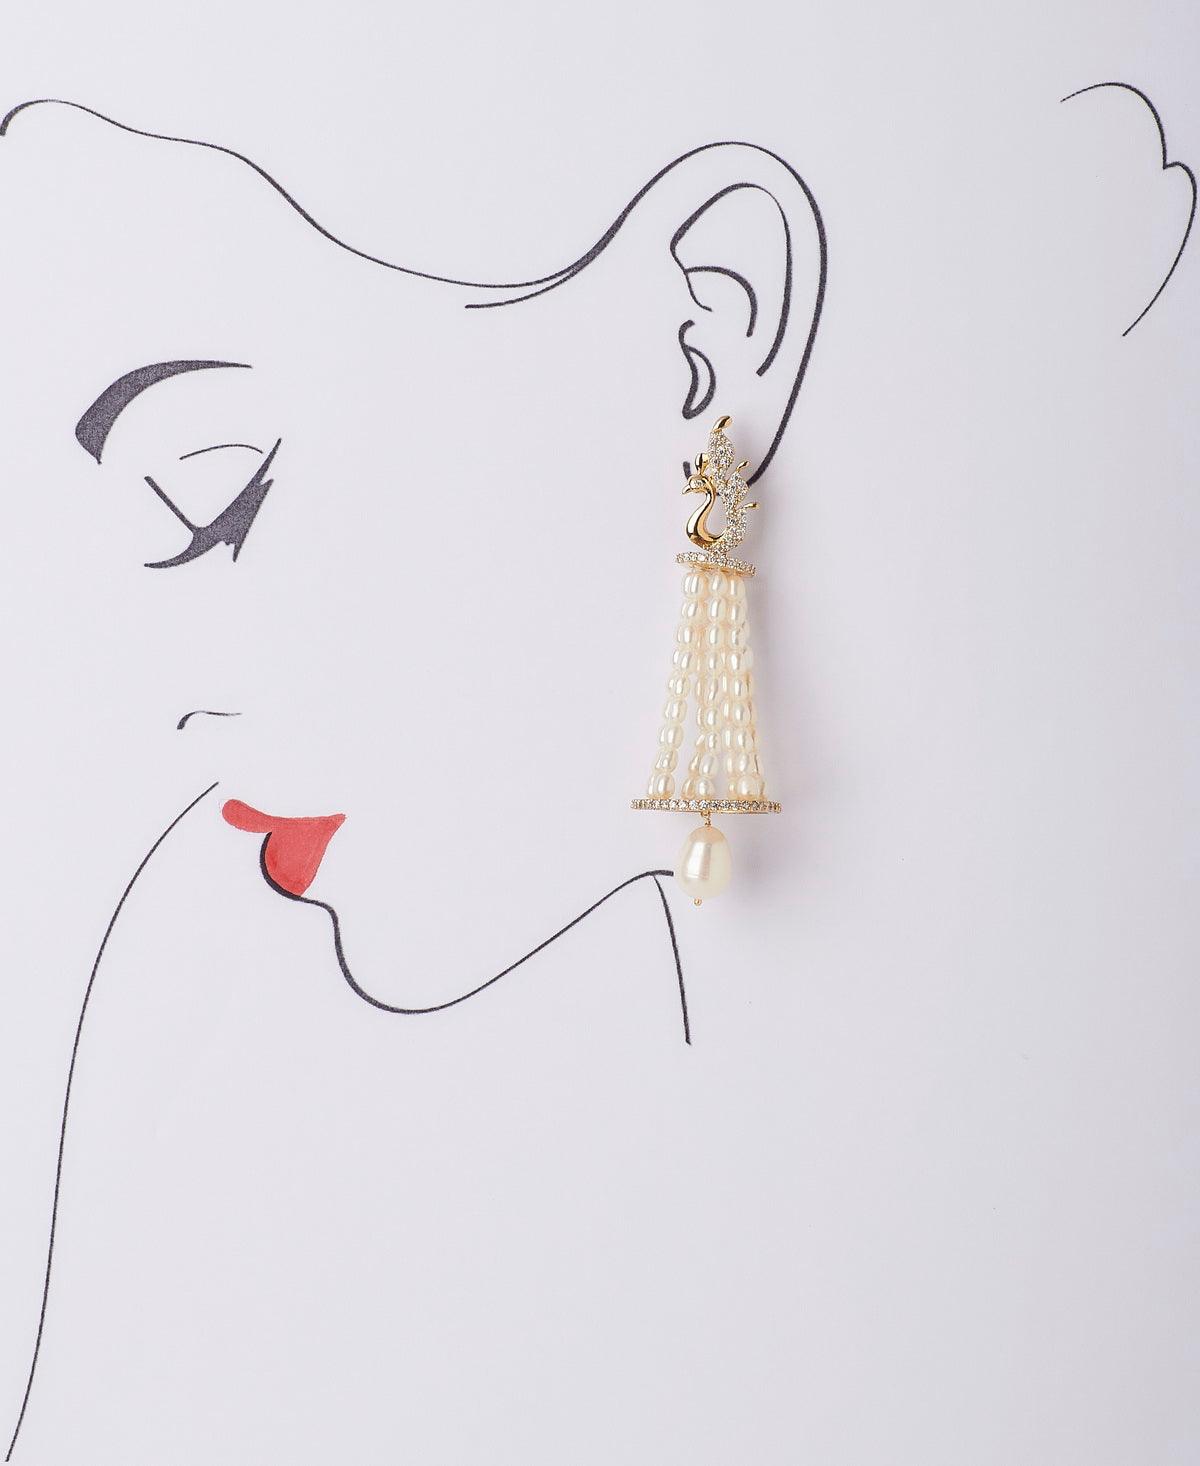 Gorgeous Golden Peacock Pearl Hanging Earring - Chandrani Pearls